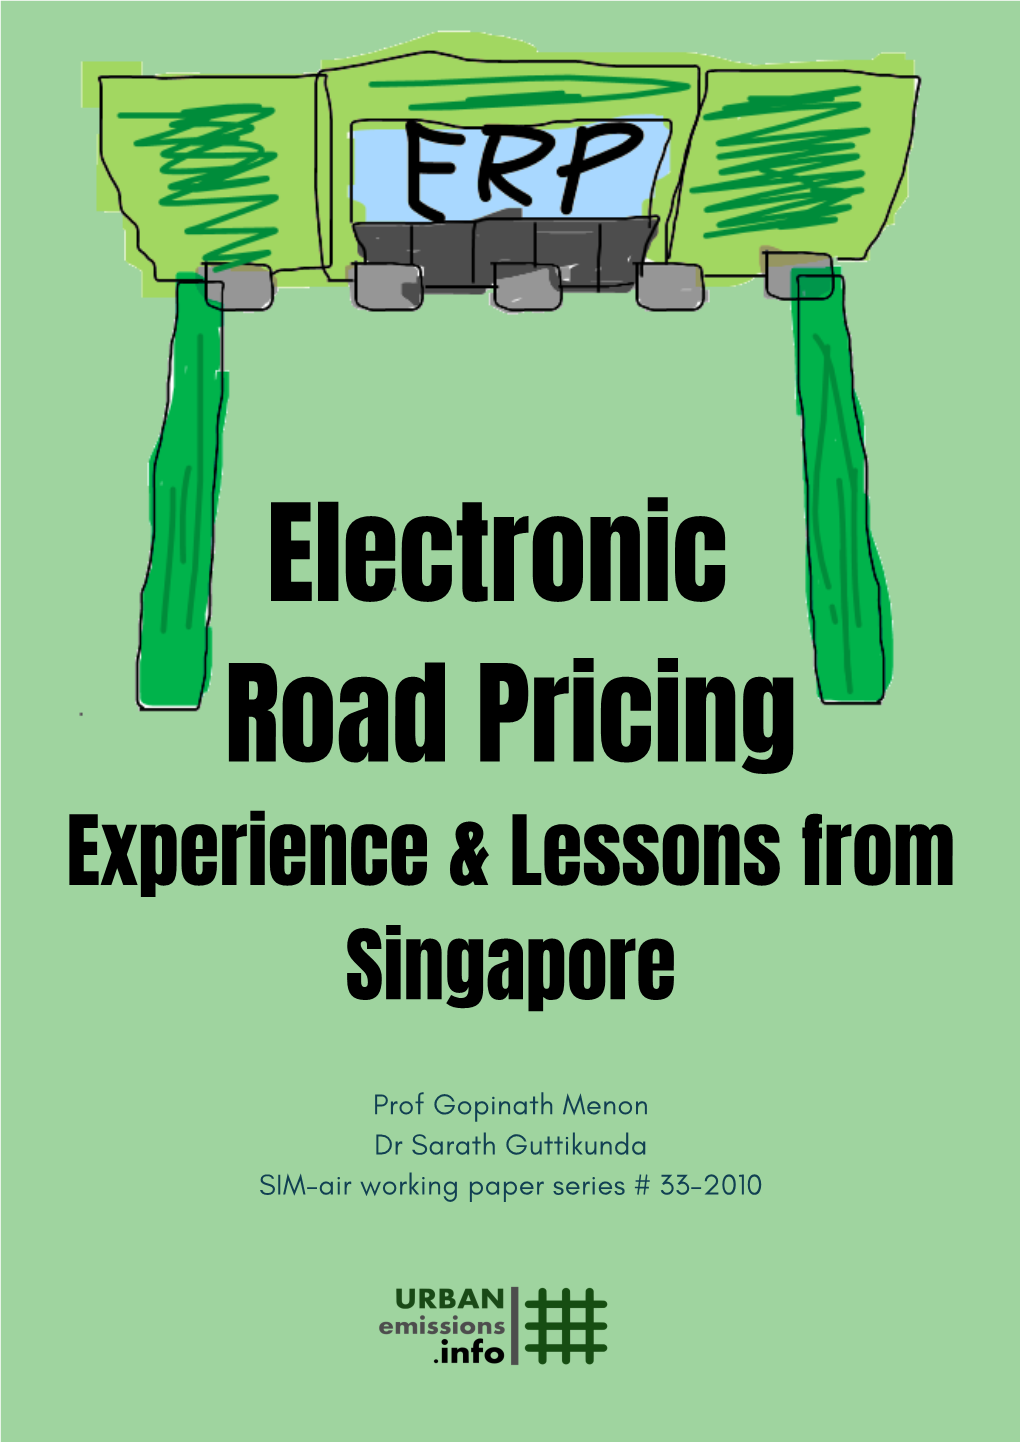 Electronic Road Pricing Experience & Lessons from Singapore